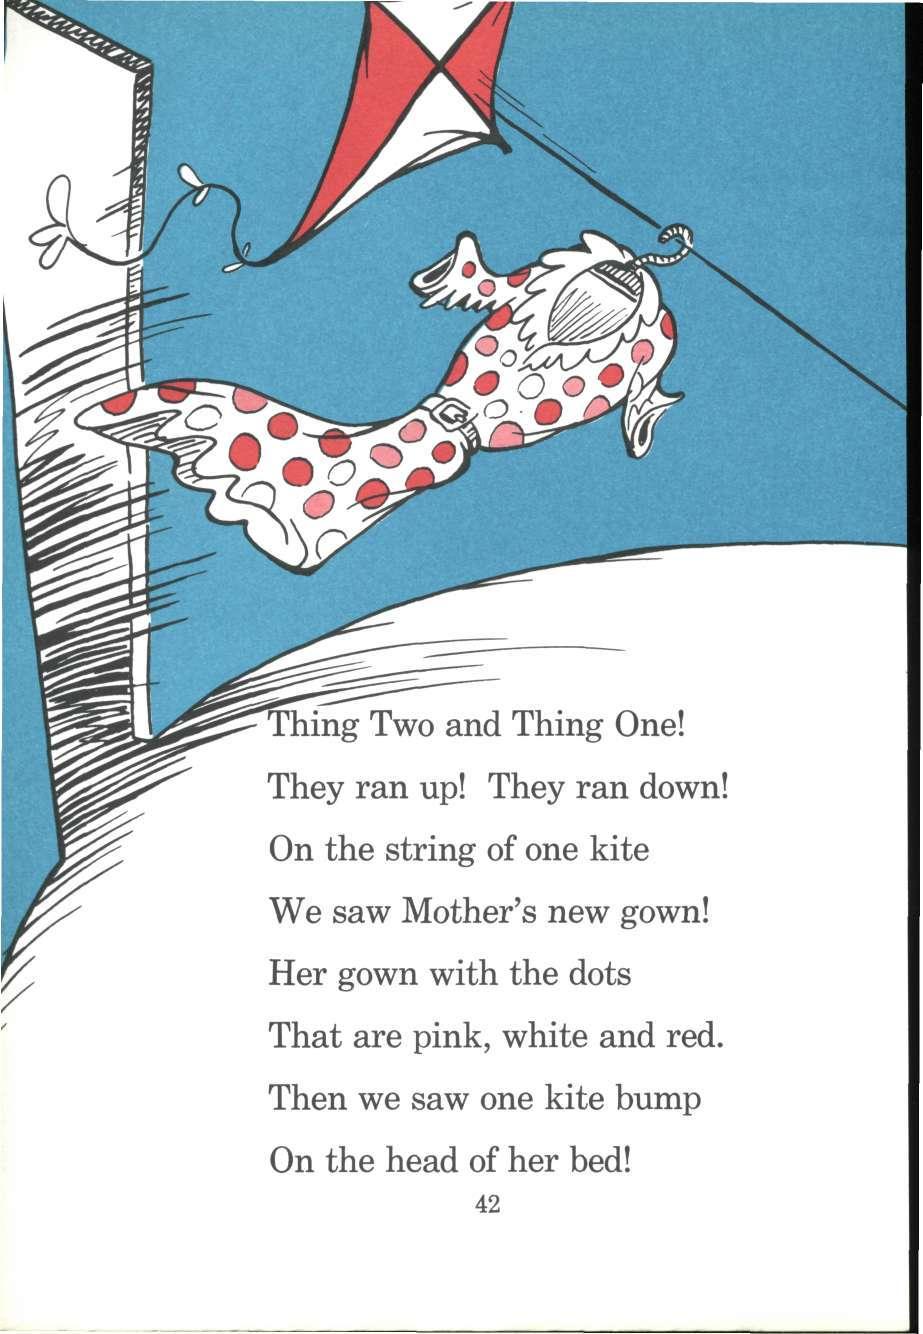 Thing Two and Thing One! They ran up! They ran down! On the string of one kite We saw Mother's new gown!